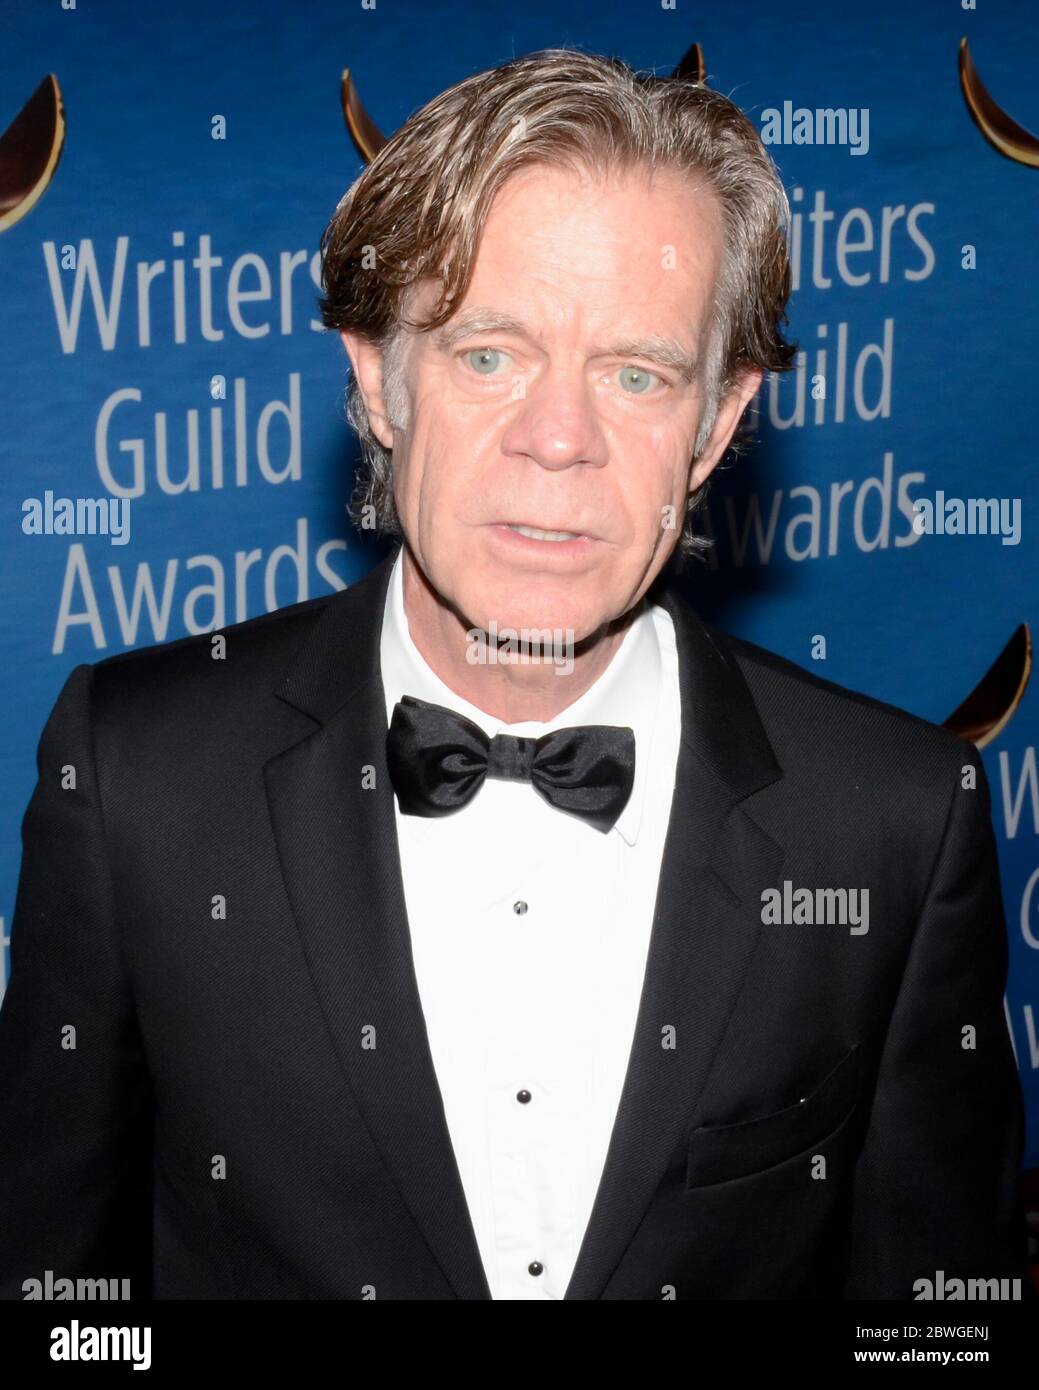 February 19, 2017: William H. Macy attend the 2017 Writers Guild Awards L.A. Ceremony at The Beverly Hilton Hotel in Beverly Hills, California on February 19, 2017. (Credit Image: © Billy Bennight/ZUMA Wire) Stock Photo